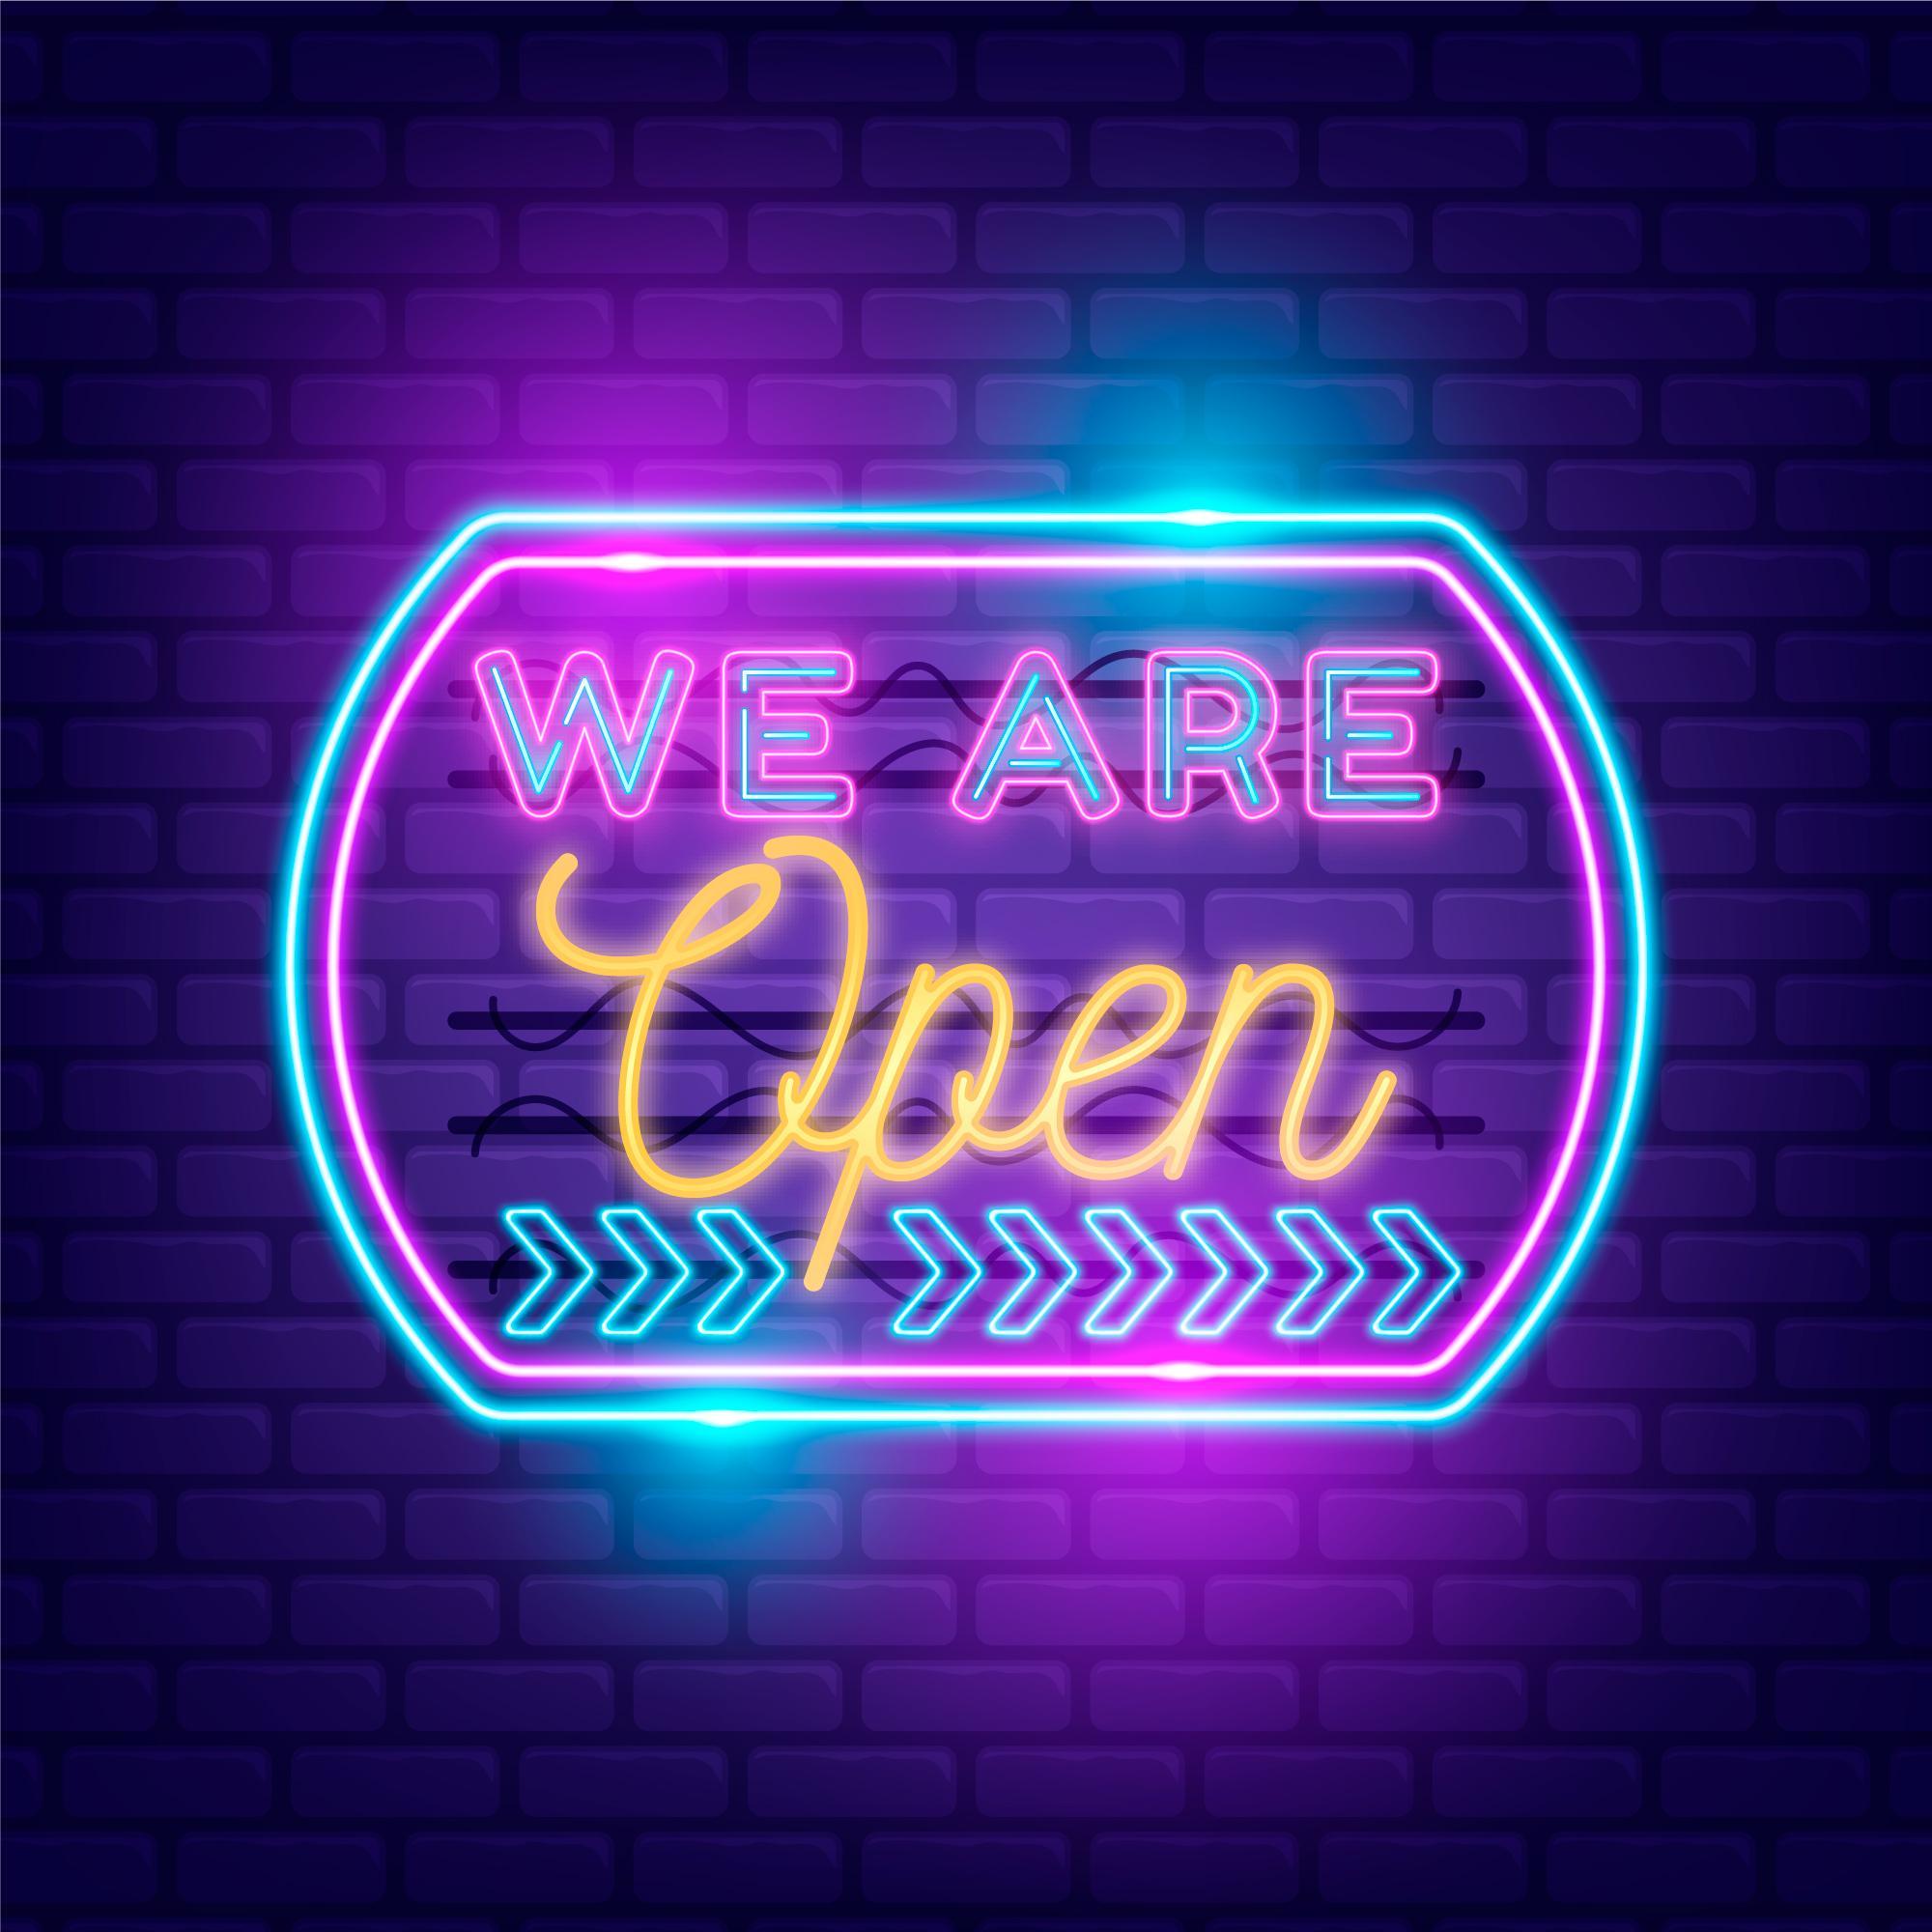 We are open sign - Neon Guys